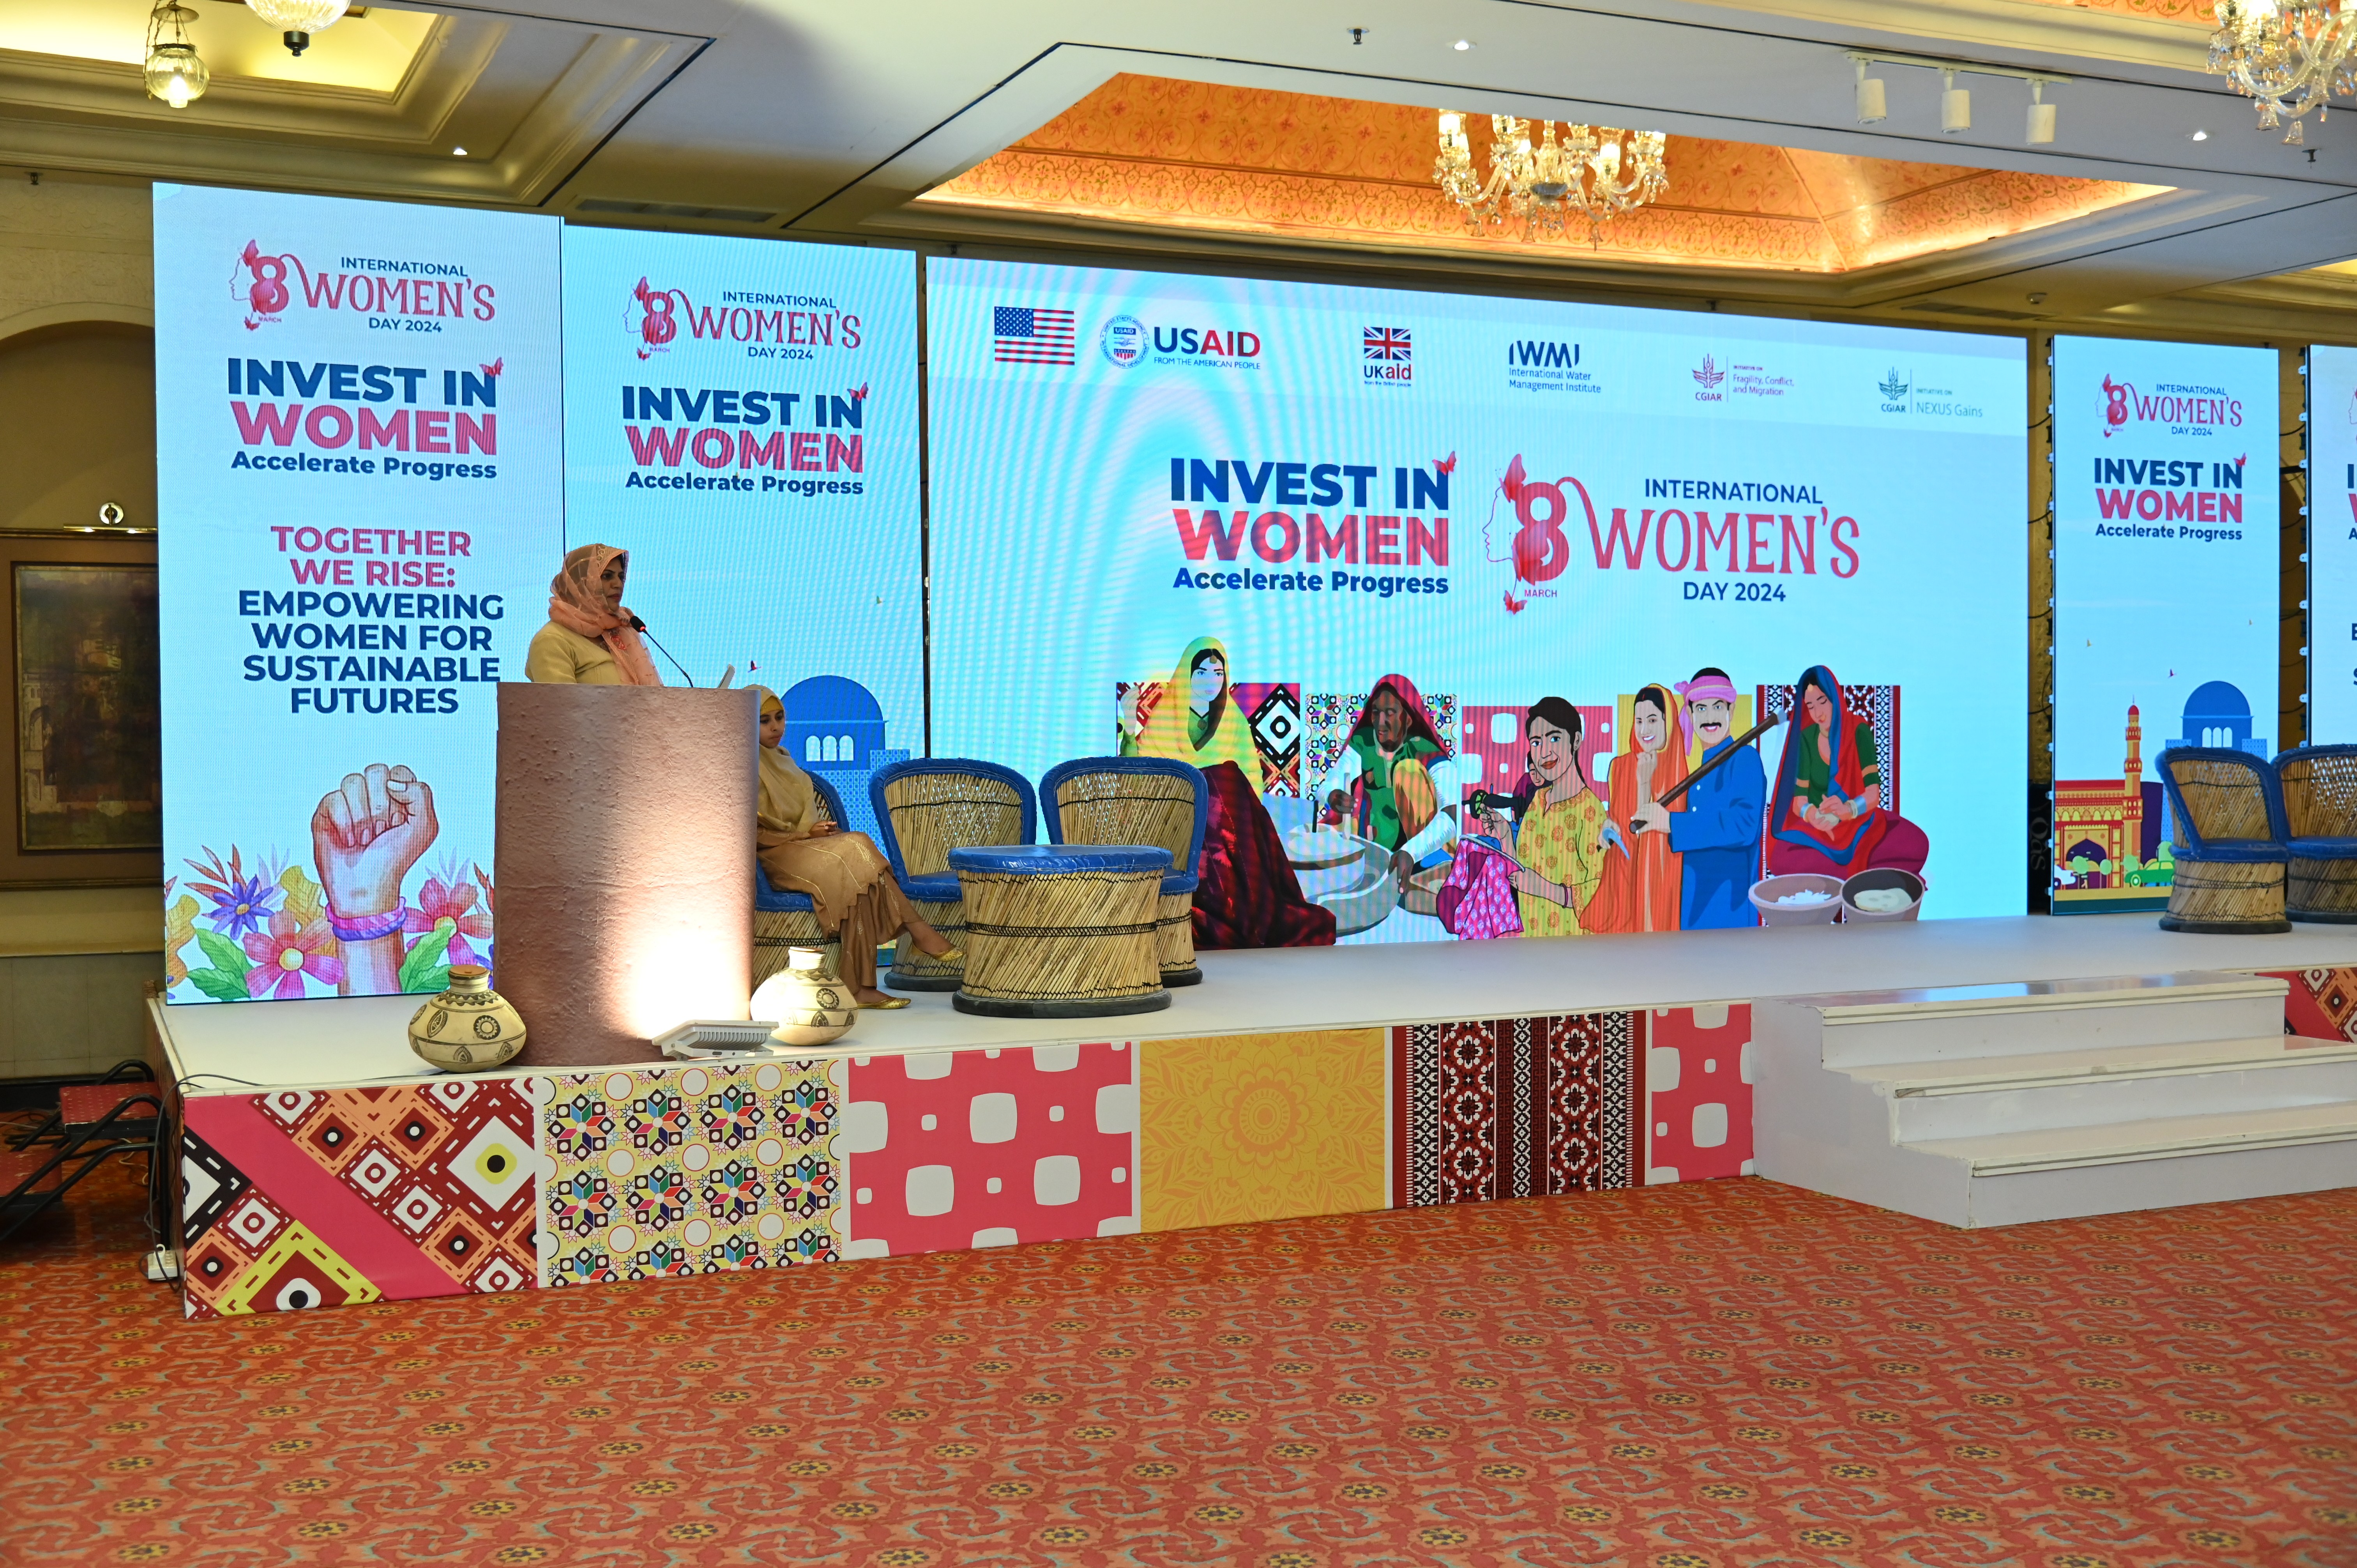 A glimpse of The Women's Day celebrations with a theme, "Together we rise: Empowering women for sustainable futures"